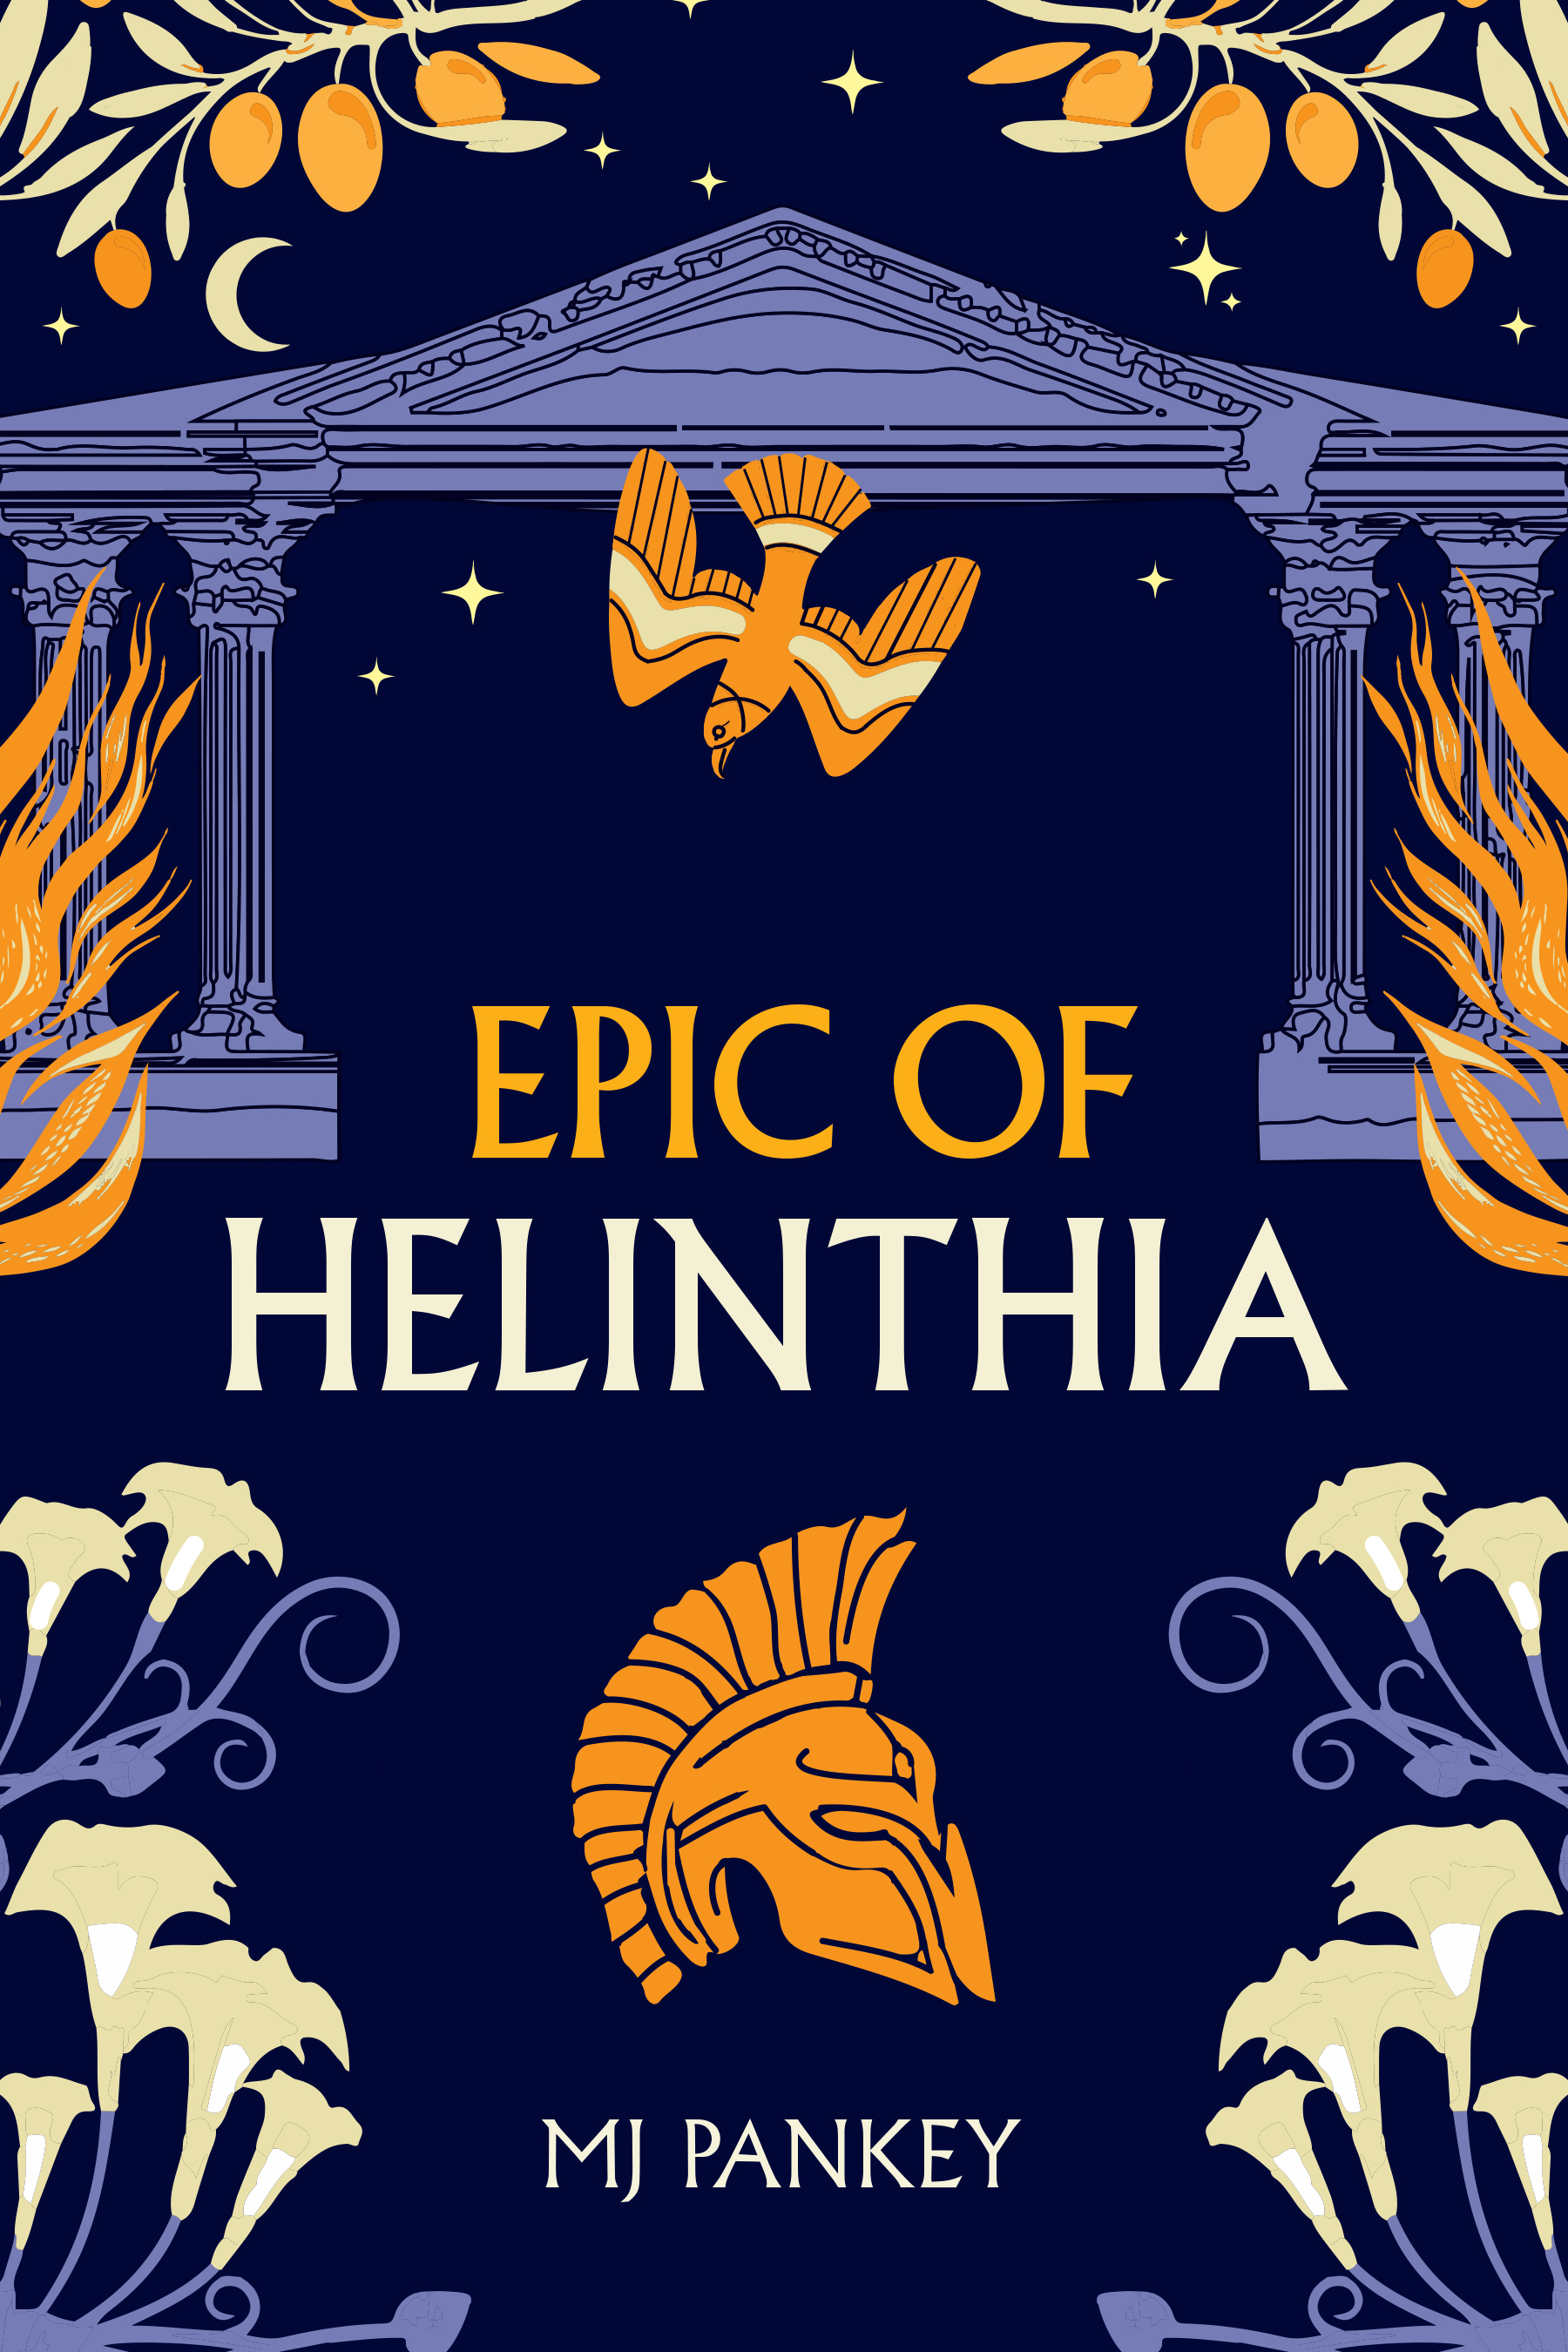 Cover of Epic of Helinthia by MJ Pankey, who gives fantasy writing advice in this blog post.